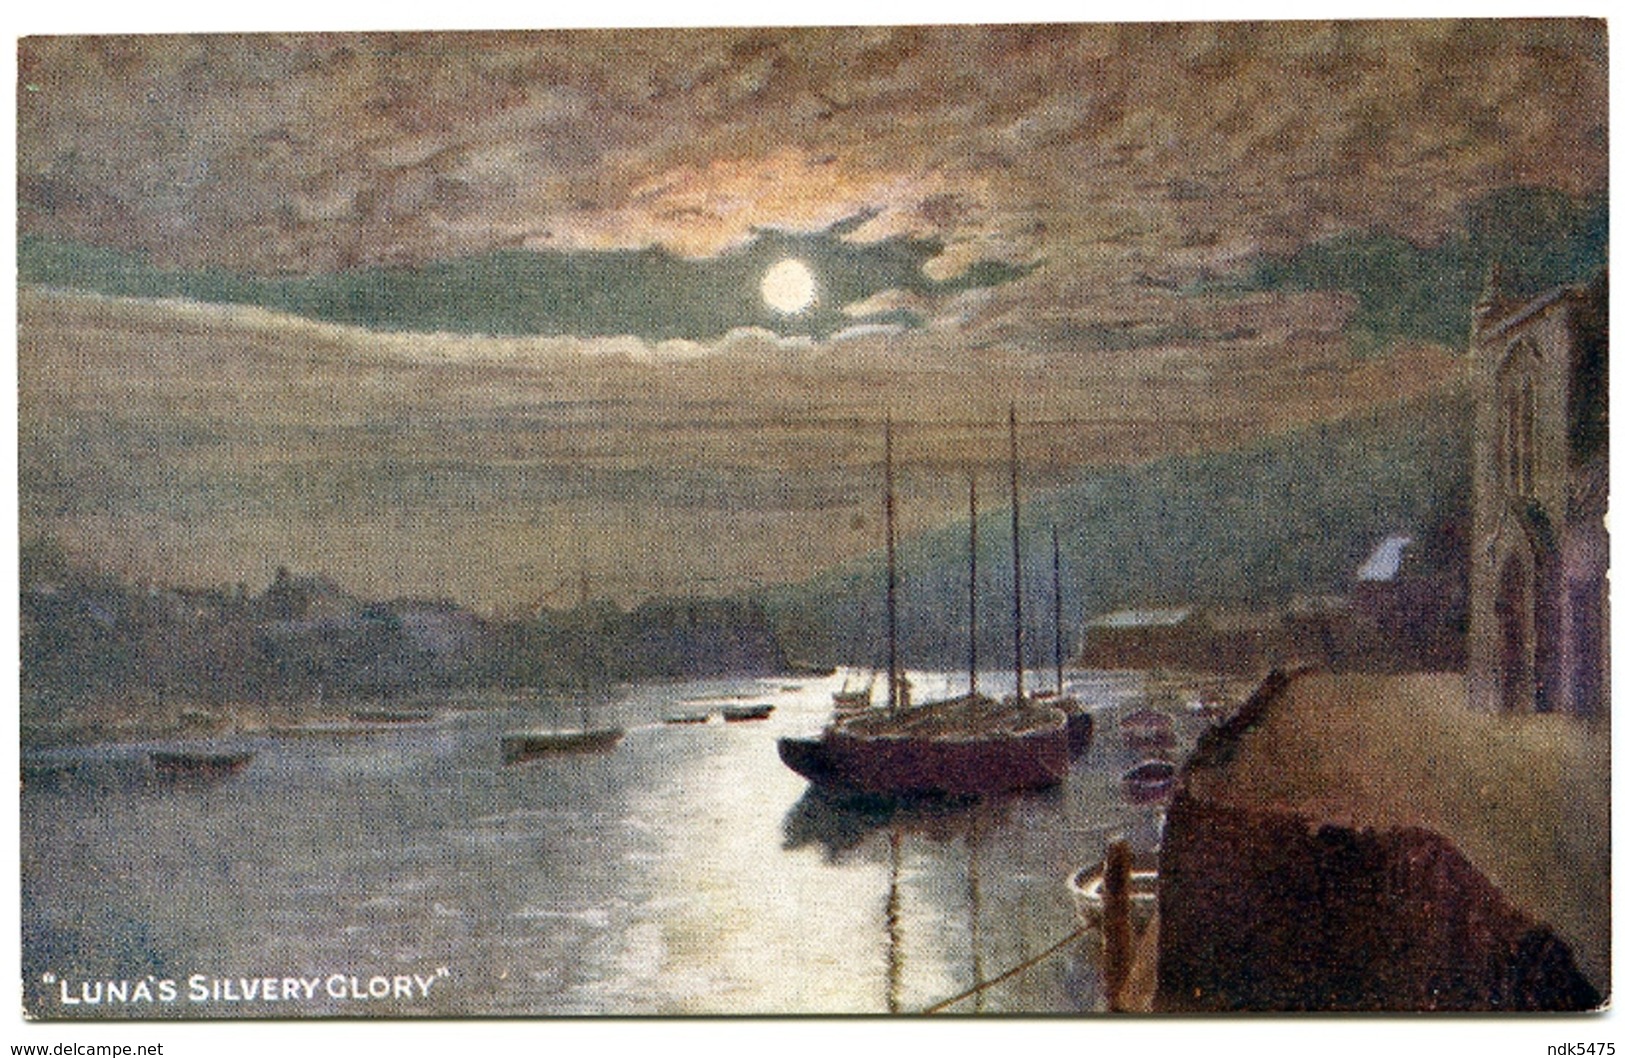 ARTIST : LUNA'S SILVERY GLORY - MOONLIGHT, RIVER SCENE WITH SHIPS AND PIER - 1900-1949